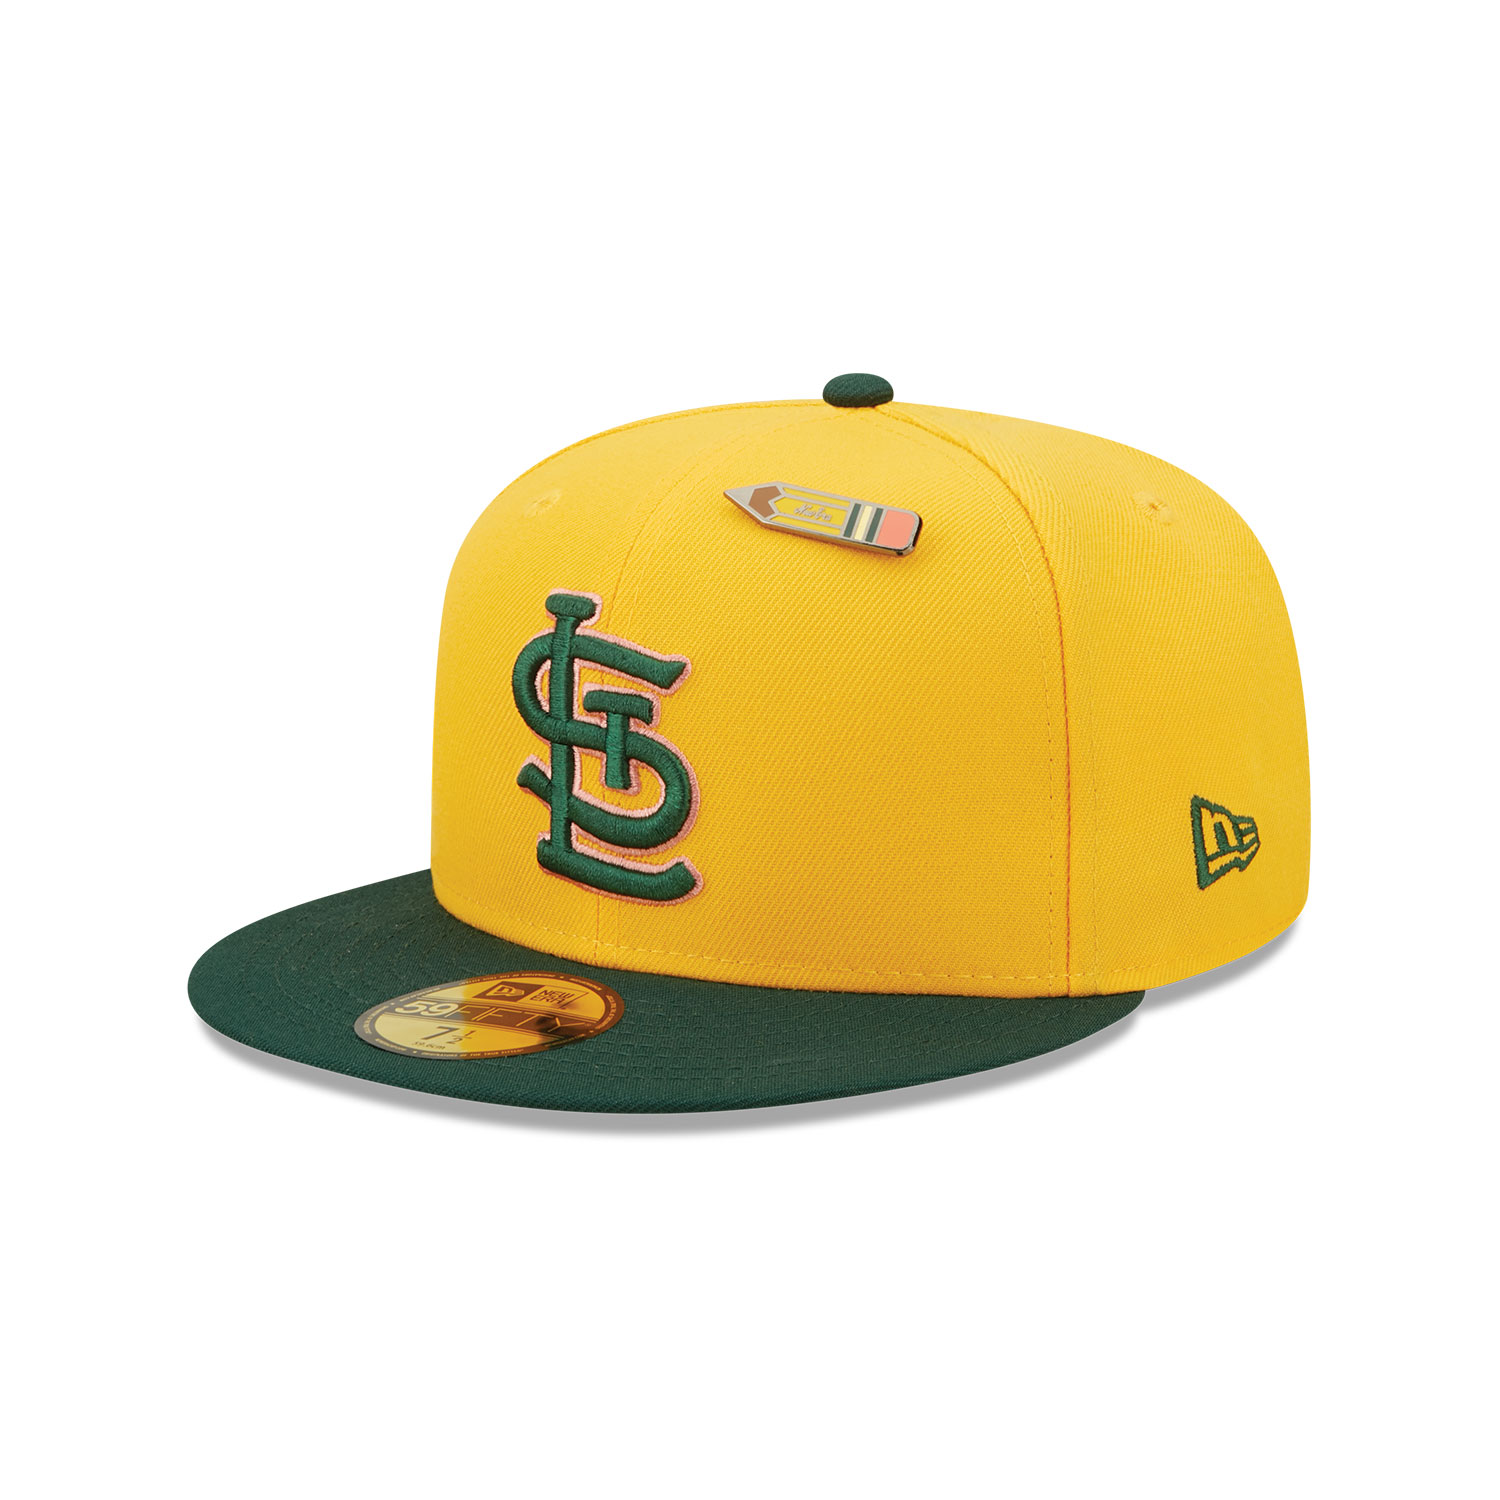 Official New Era St. Louis Cardinals MLB Back to School Yellow 59FIFTY